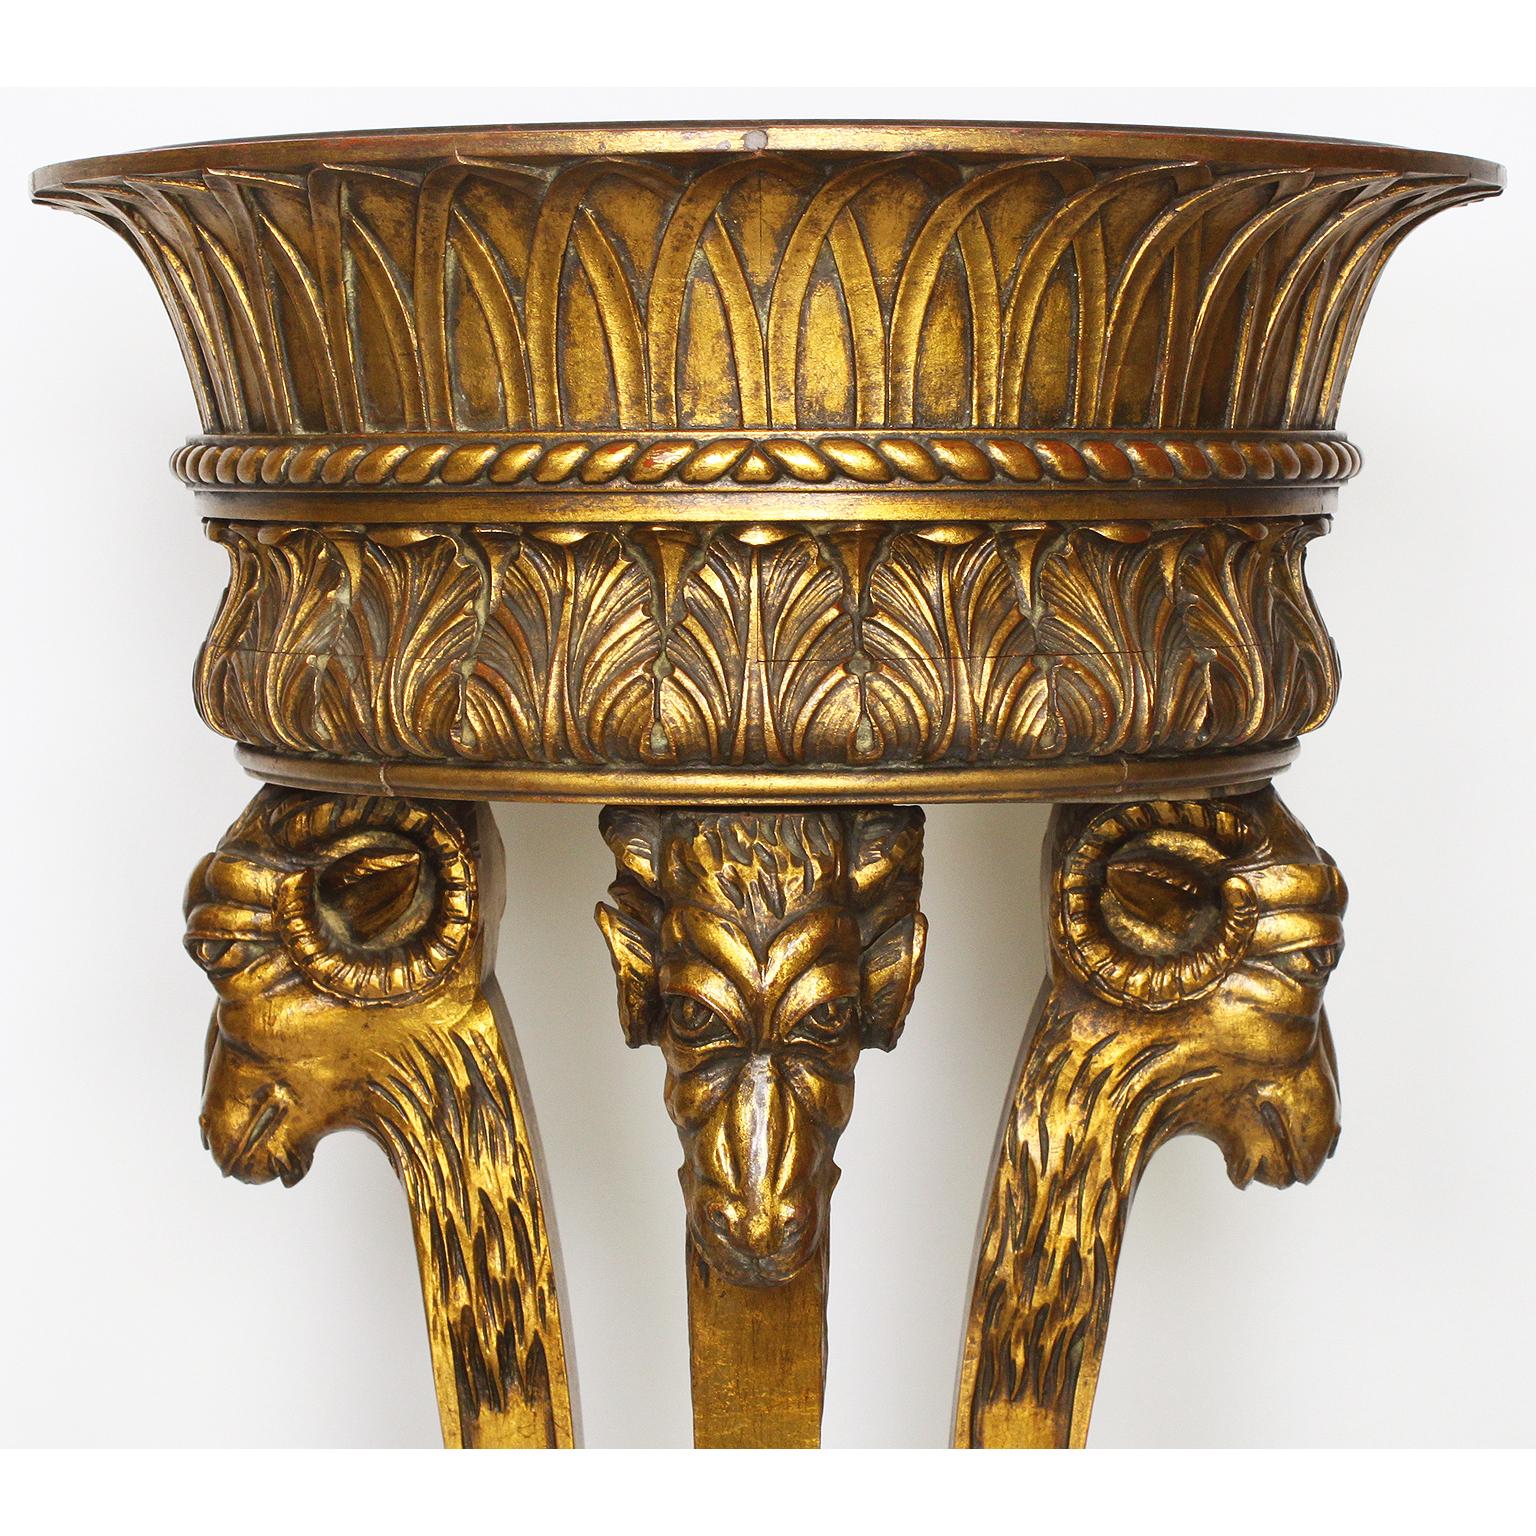 Hand-Carved Pair of French 19th-20th Century Giltwood Carved Standing Pedestal Planters For Sale